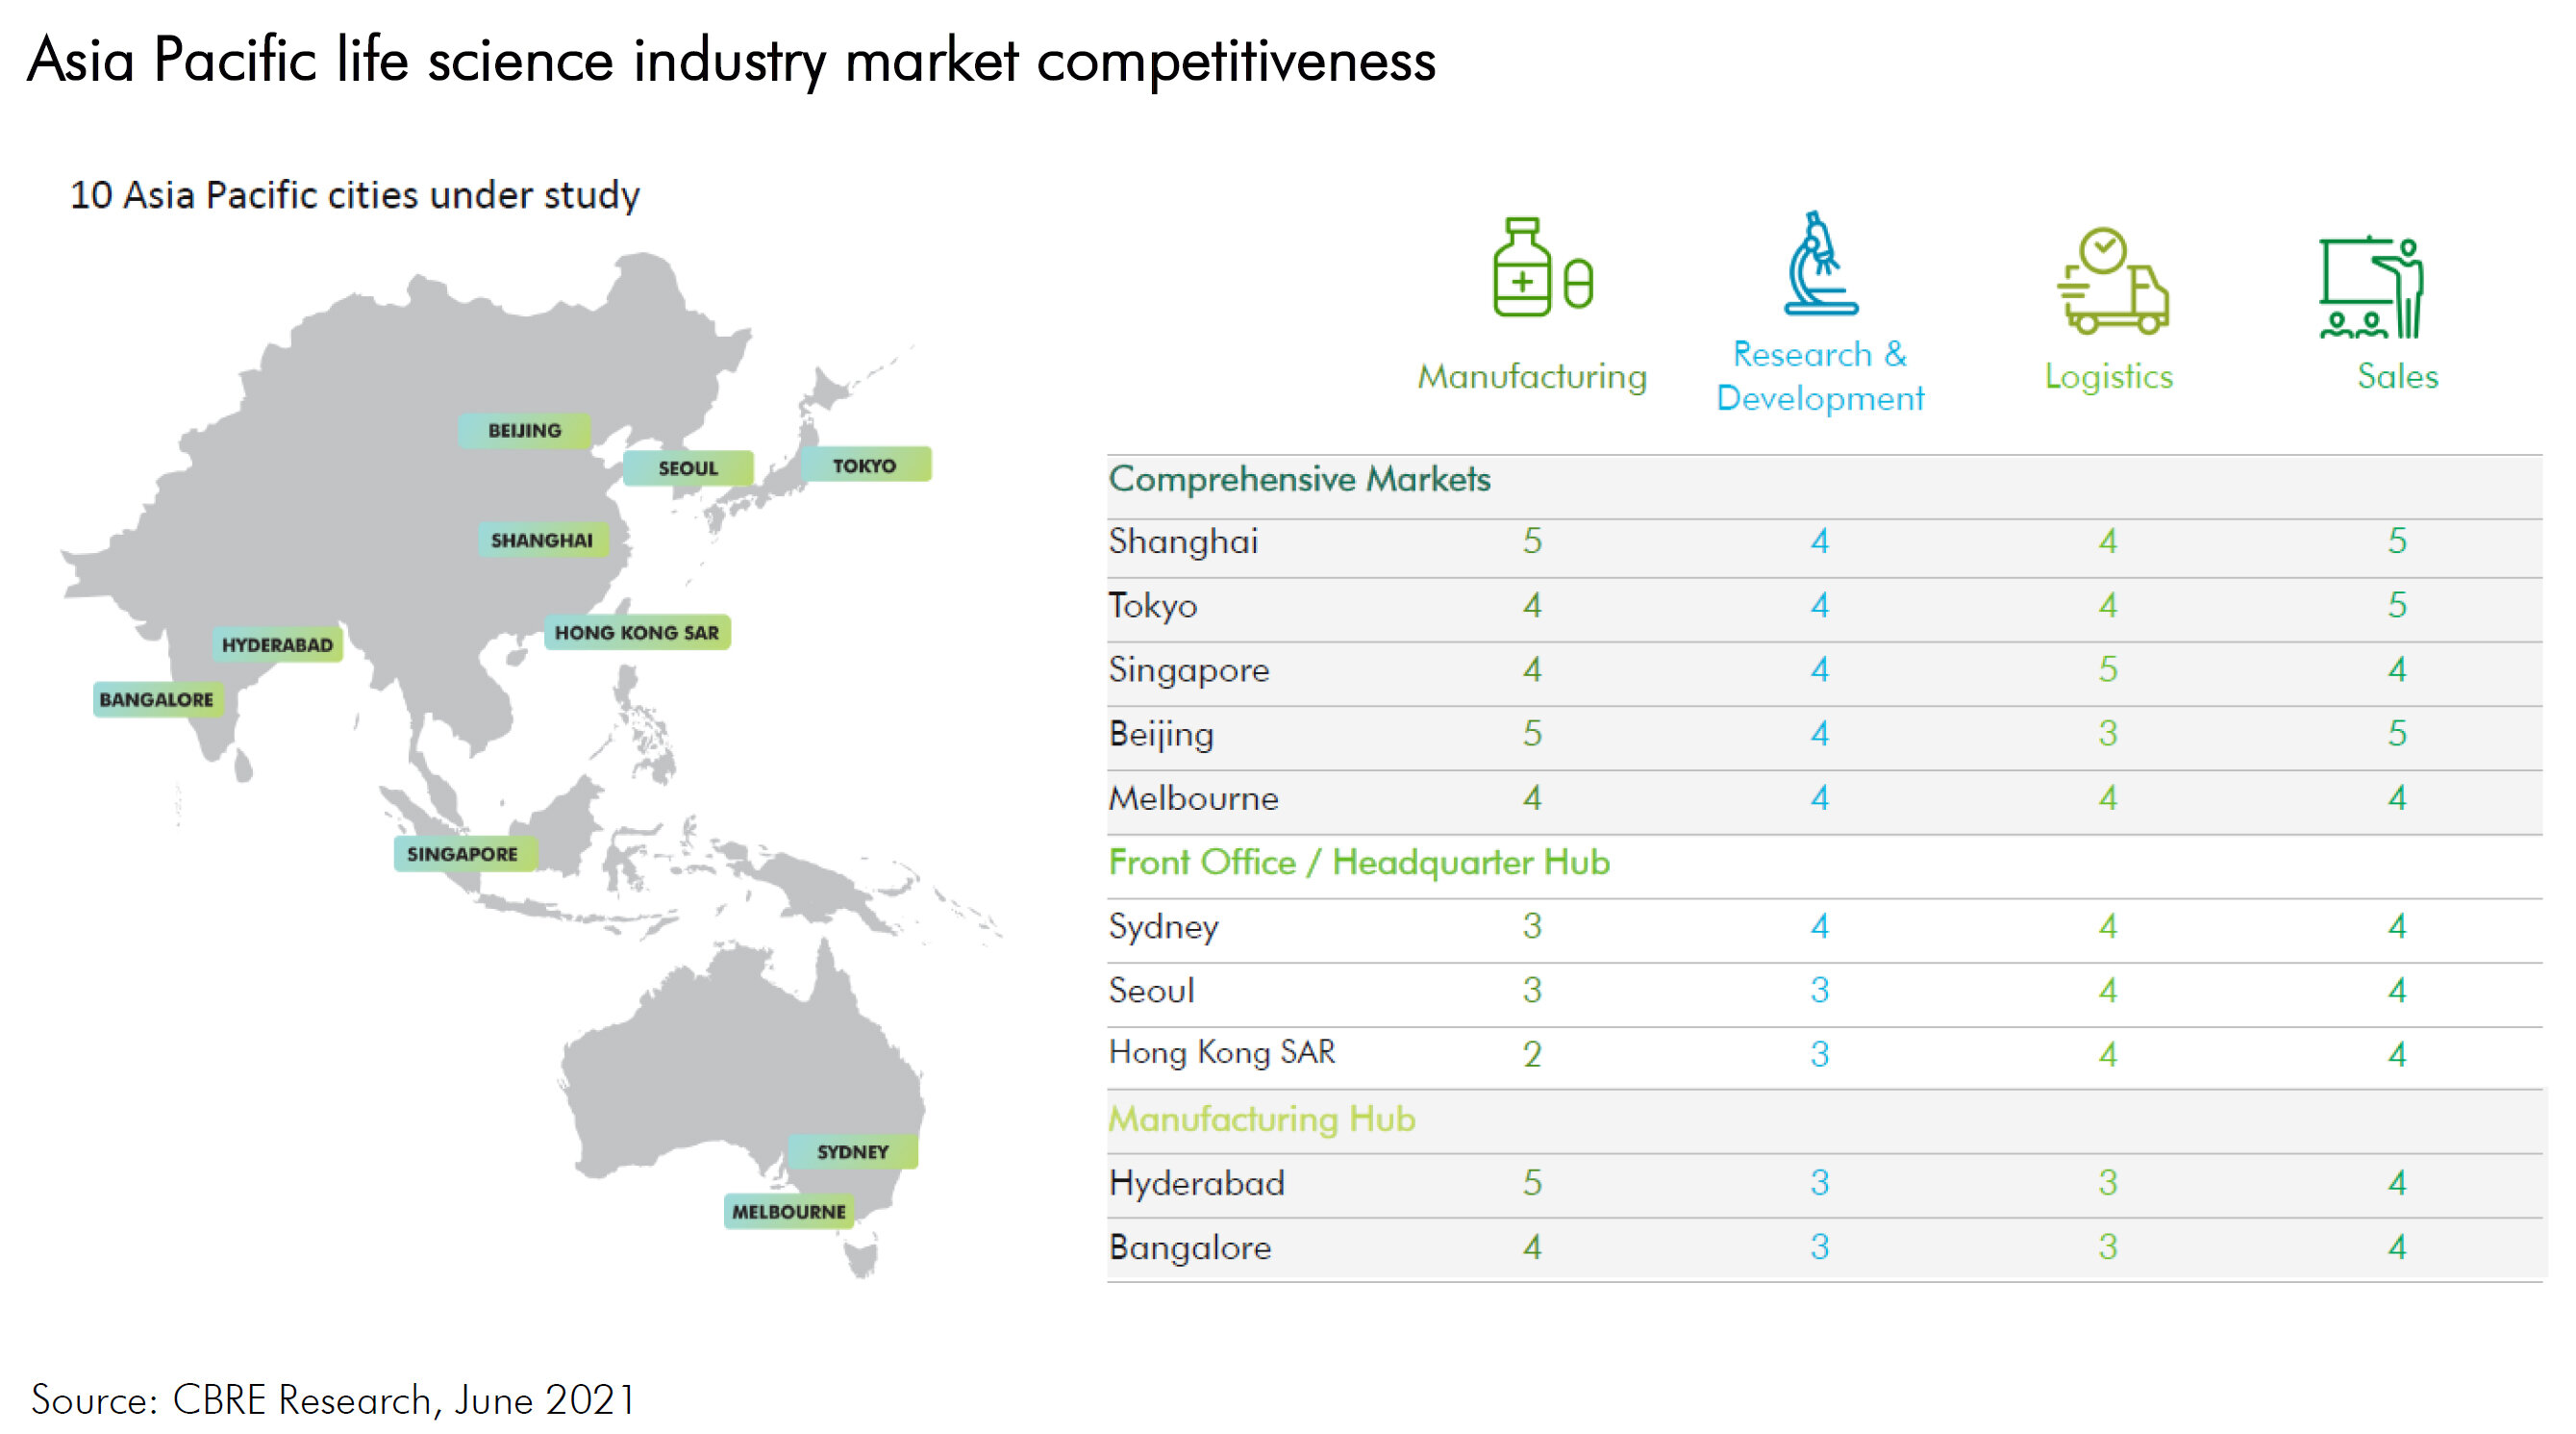 https://www.worldpropertyjournal.com/news-assets/Asia-Pacific-life-science-industry-market-competitiveness.jpg